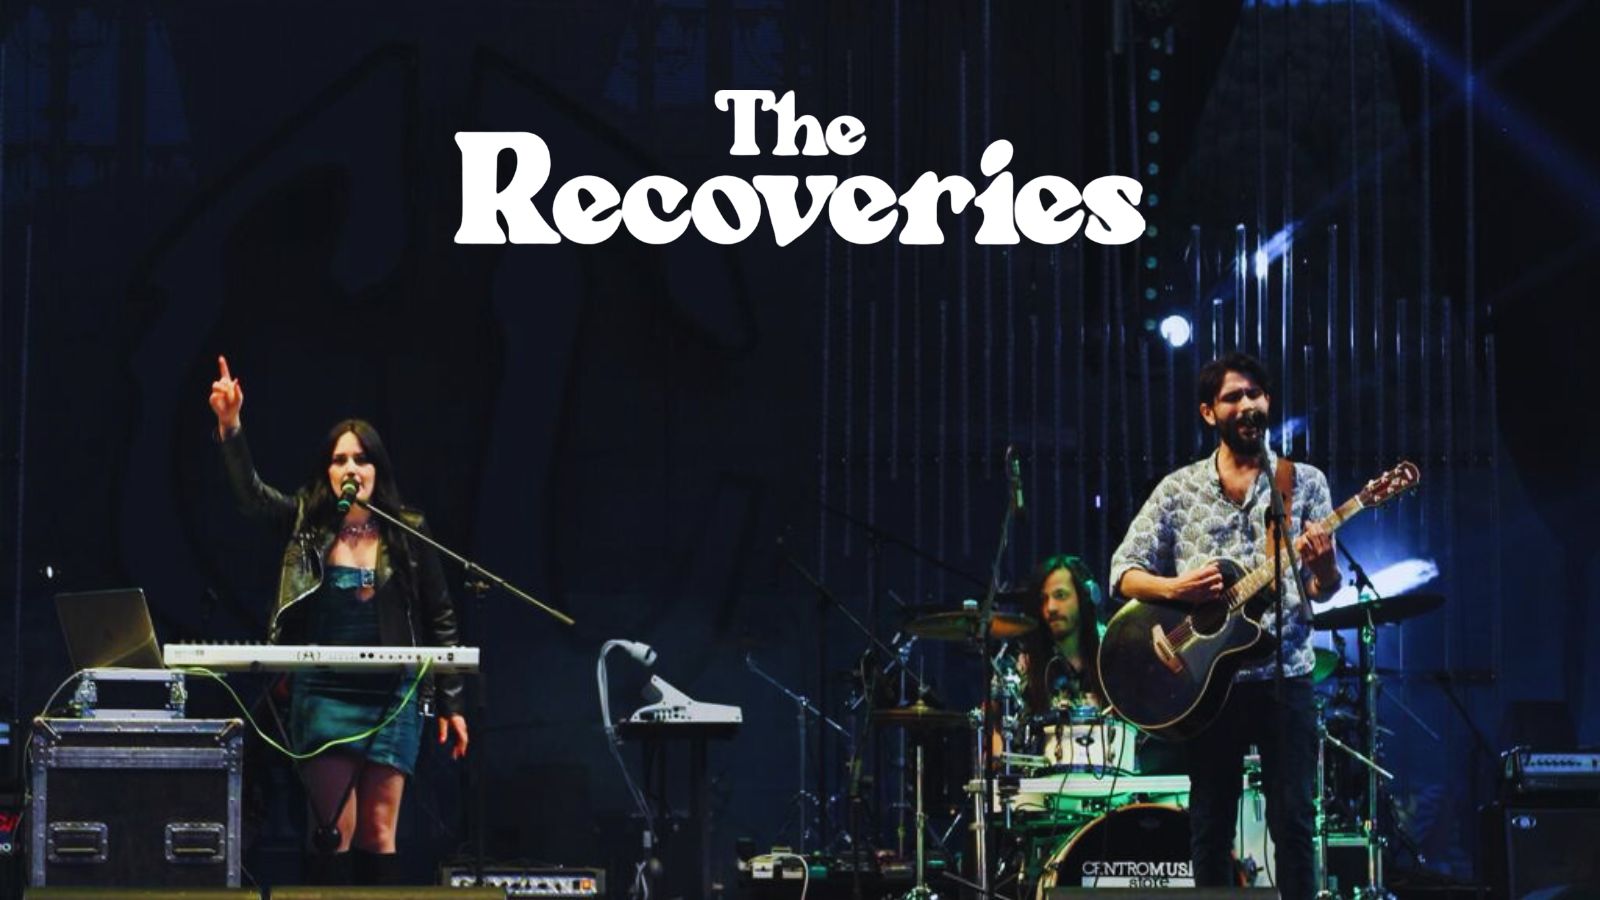 The Recoveries Release a New Single “Mr. Robot”